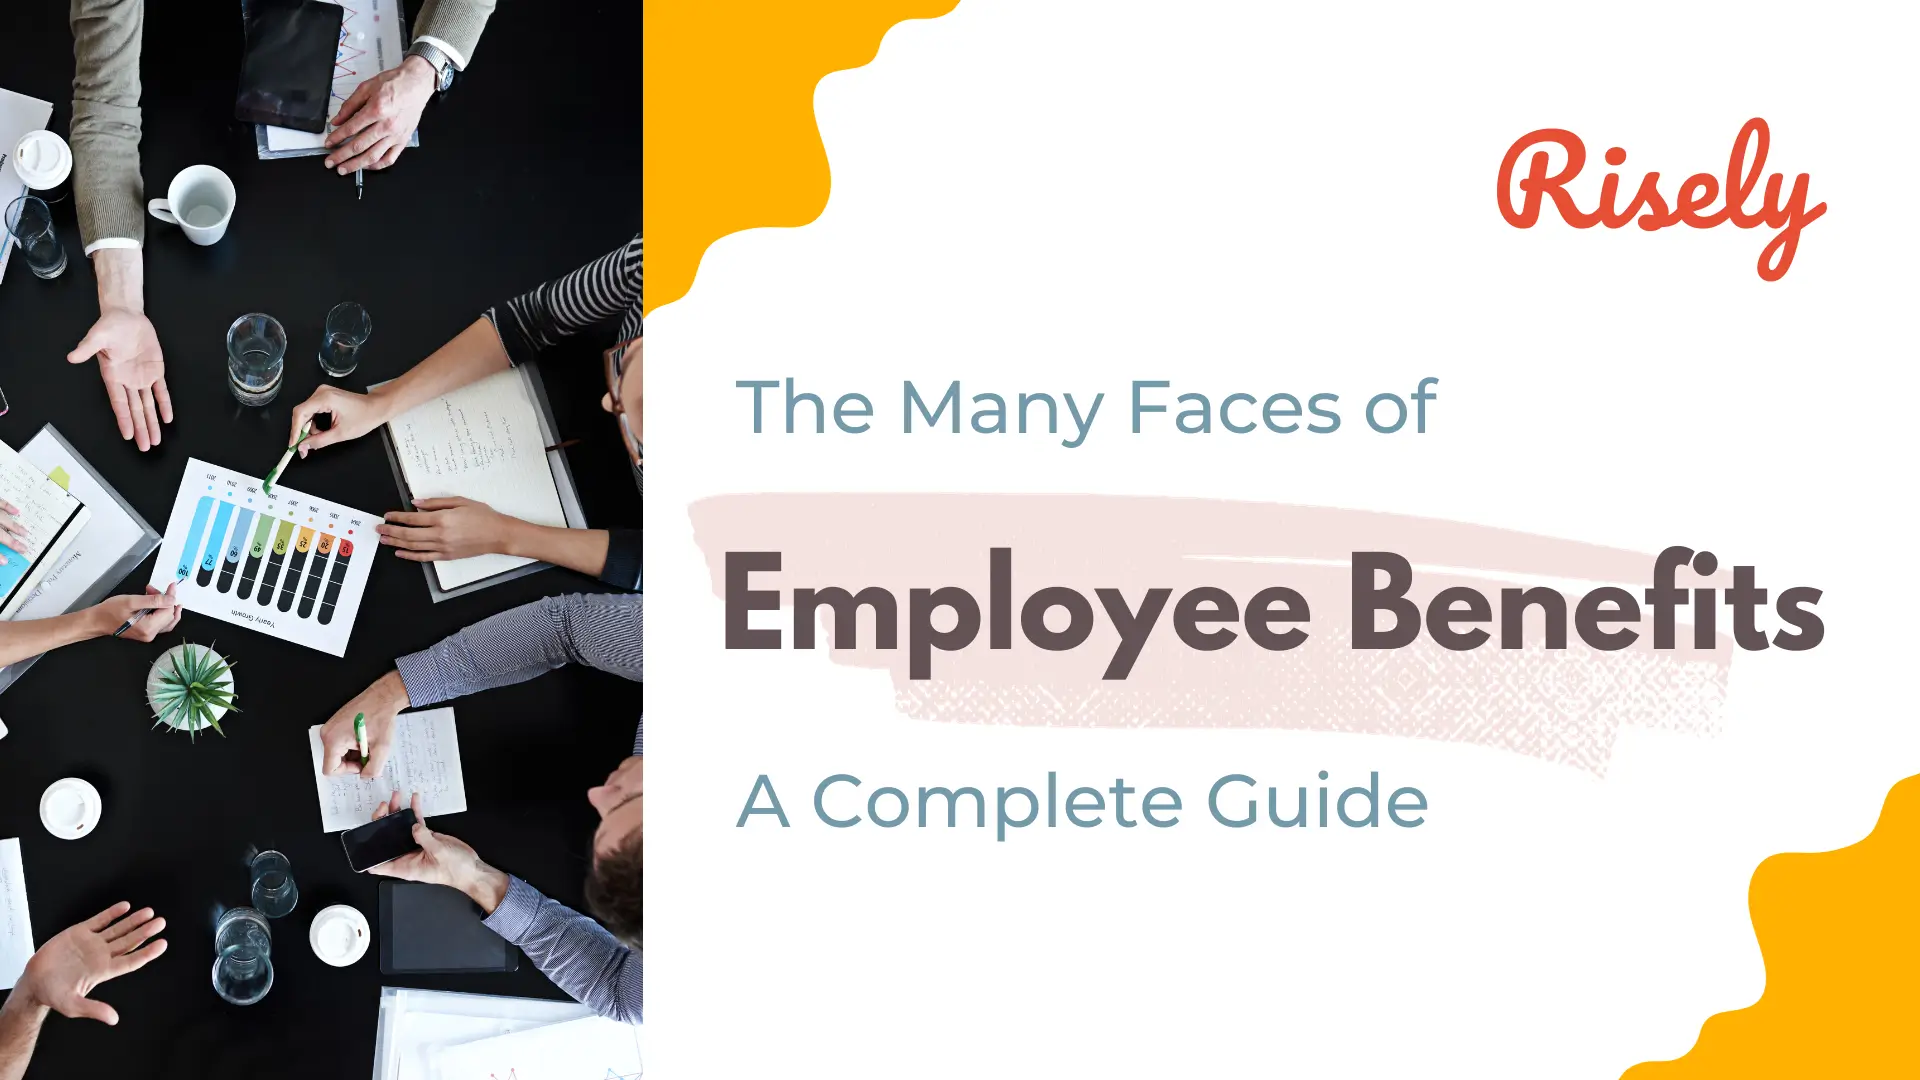 The Many Faces of Employee Benefits: A Complete Guide